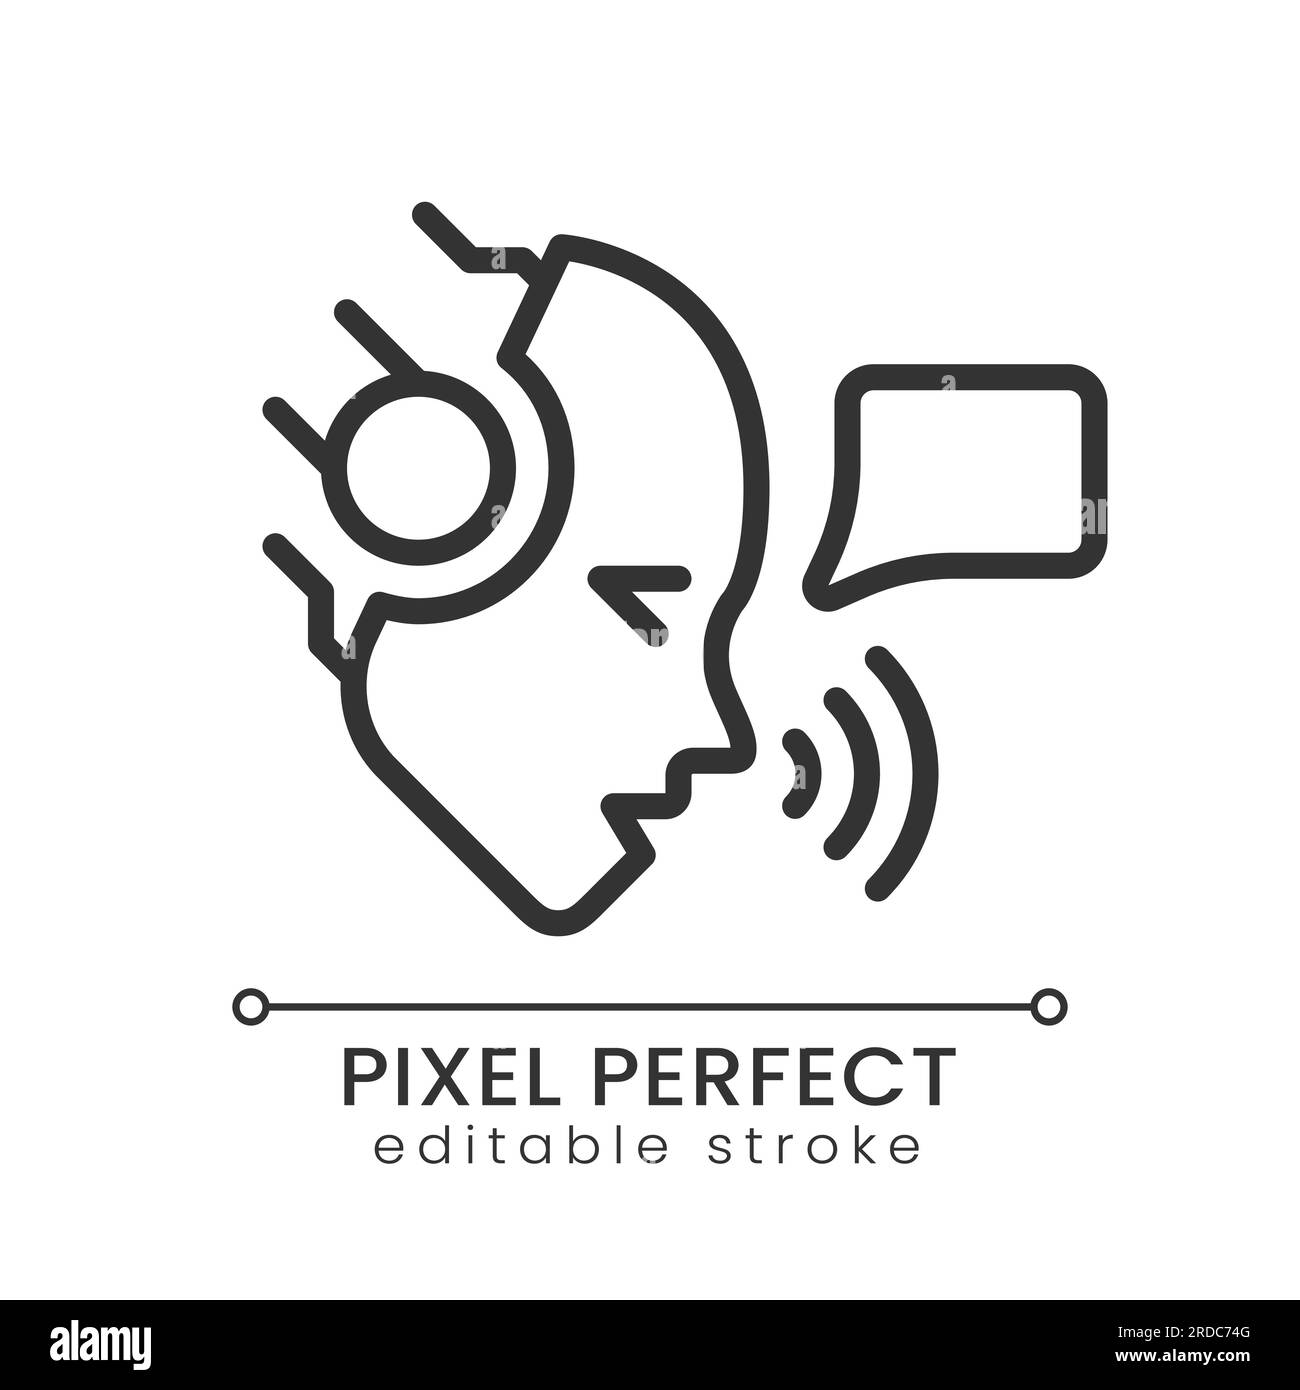 AI speaks pixel perfect linear icon Stock Vector